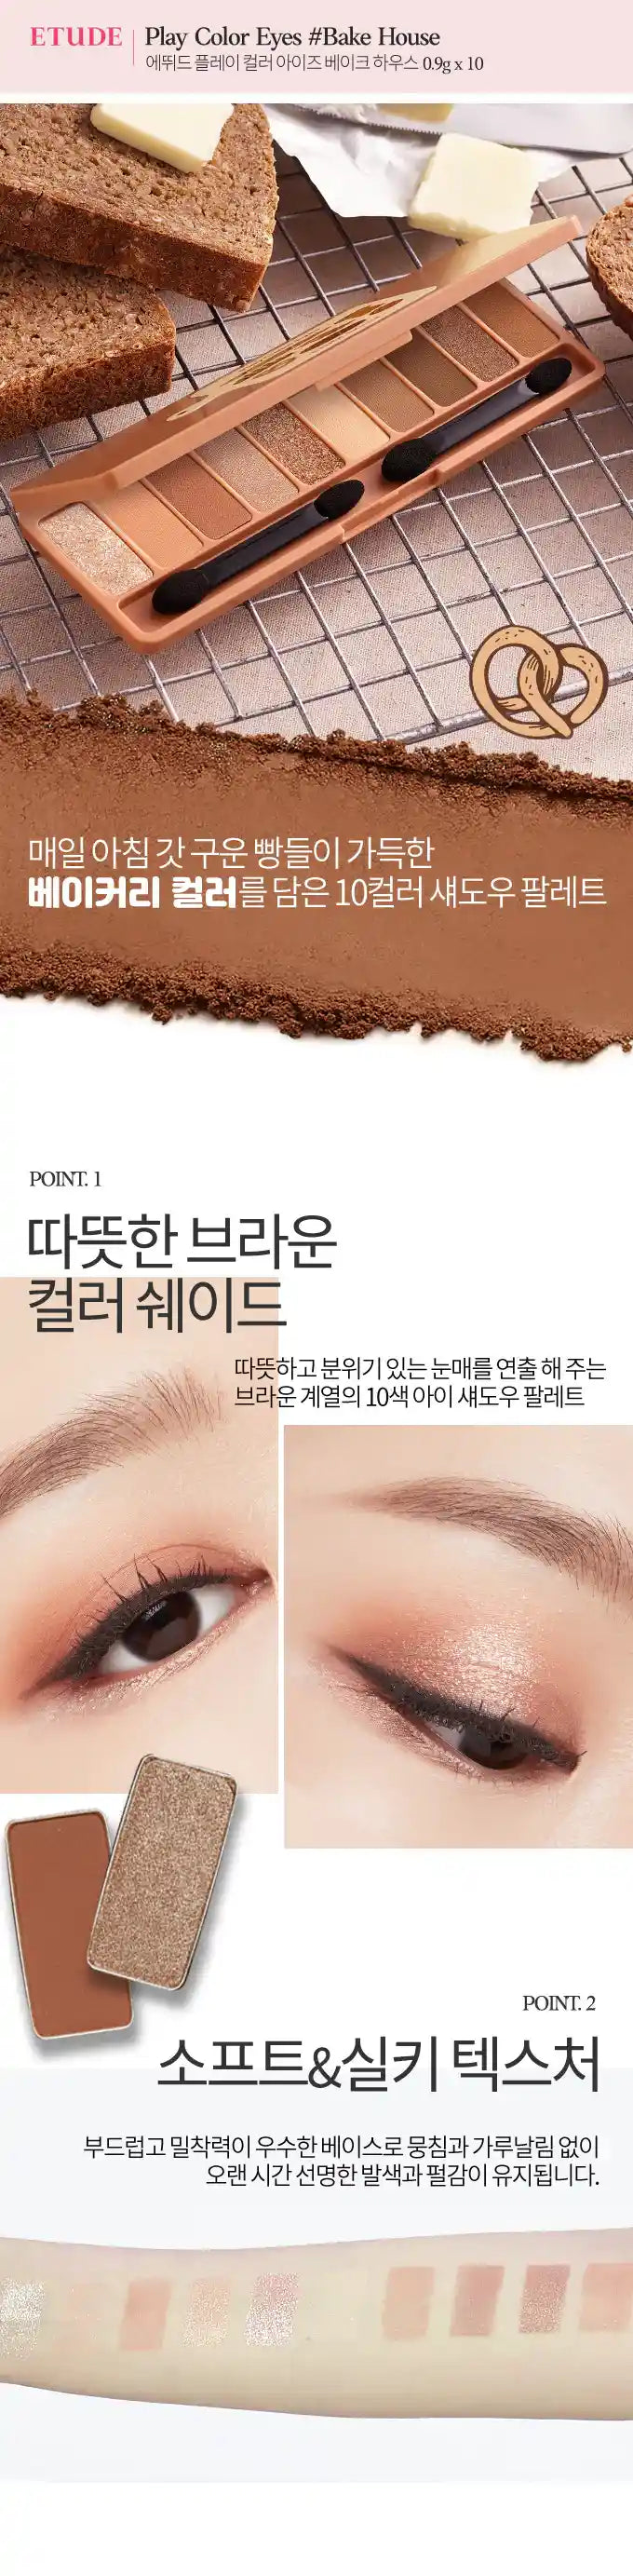 ETUDE HOUSE PLAY COLOR EYES BAKE HOUSE EmpressKorea ETUDE HOUSE PLAY COLOR EYES # BAKE HOUSE *Point 1 Warm brown color shadeC...